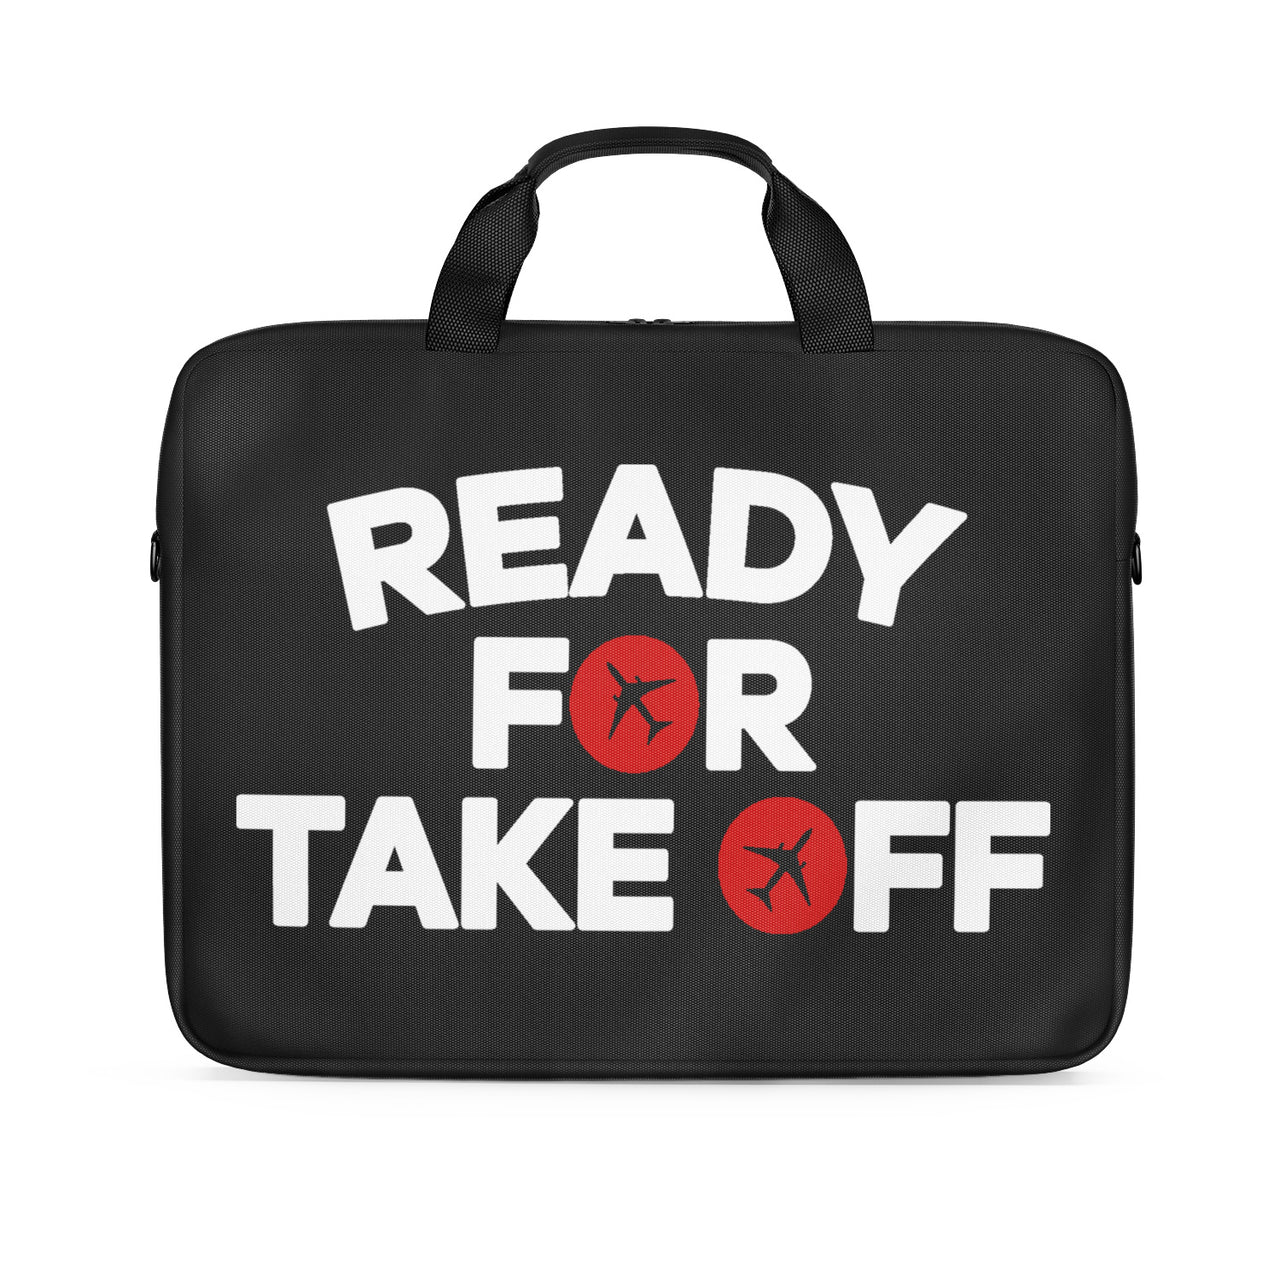 Ready For Takeoff Designed Laptop & Tablet Bags